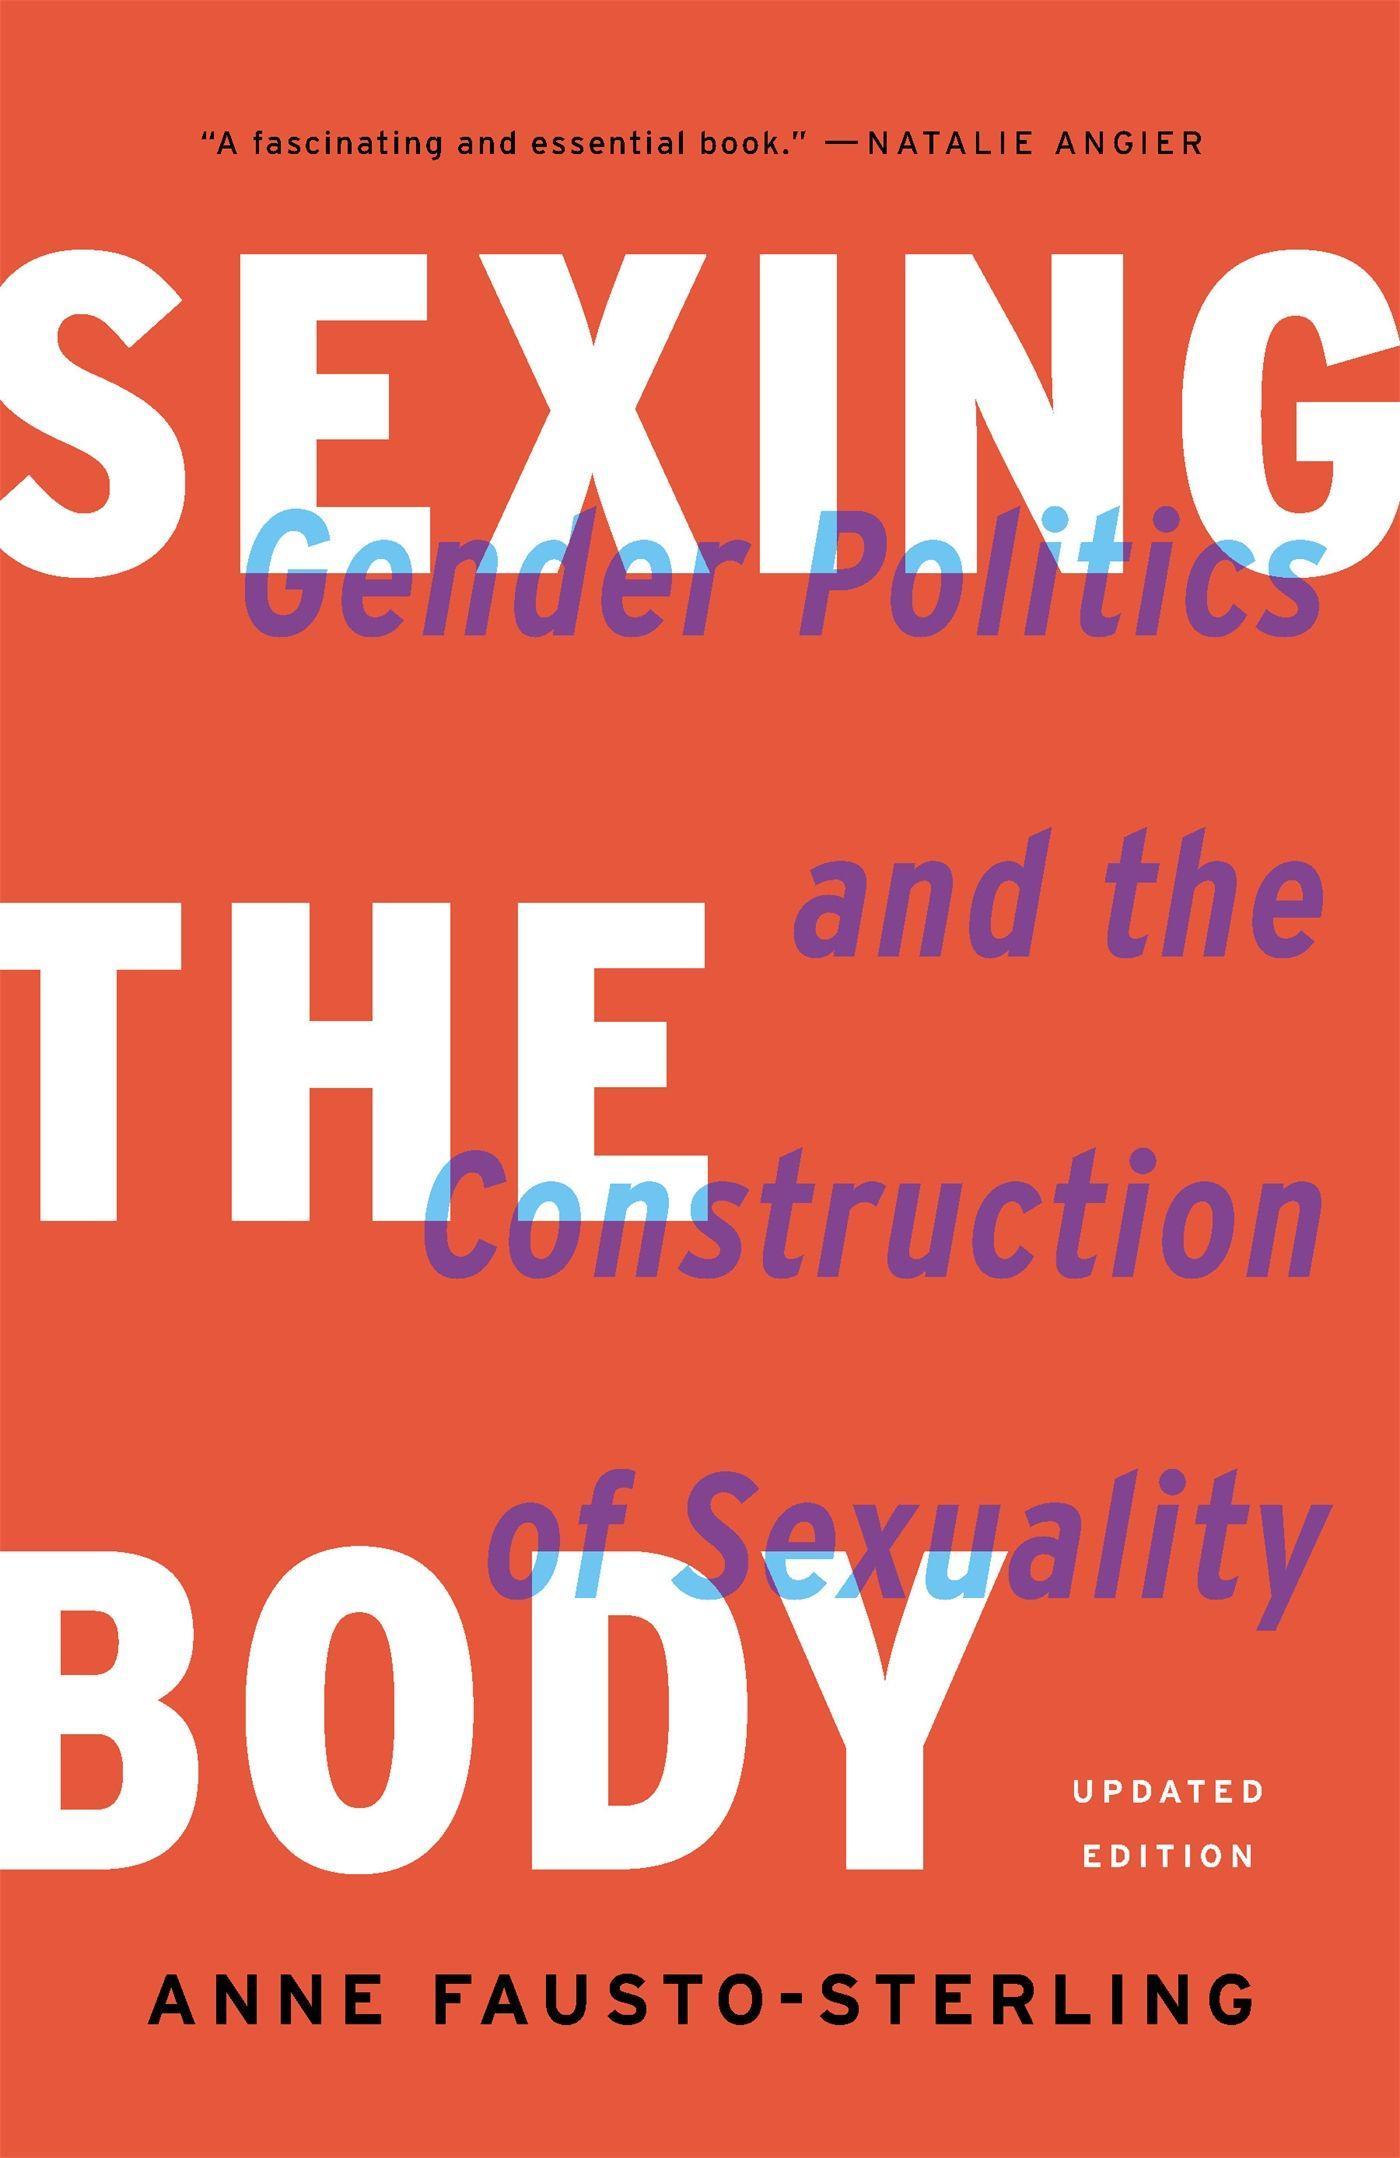 Sexing the Body | Gender Politics and the Construction of Sexuality | Anne Fausto-Sterling | Taschenbuch | Englisch | 2020 | BASIC BOOKS | EAN 9781541672895 - Fausto-Sterling, Anne